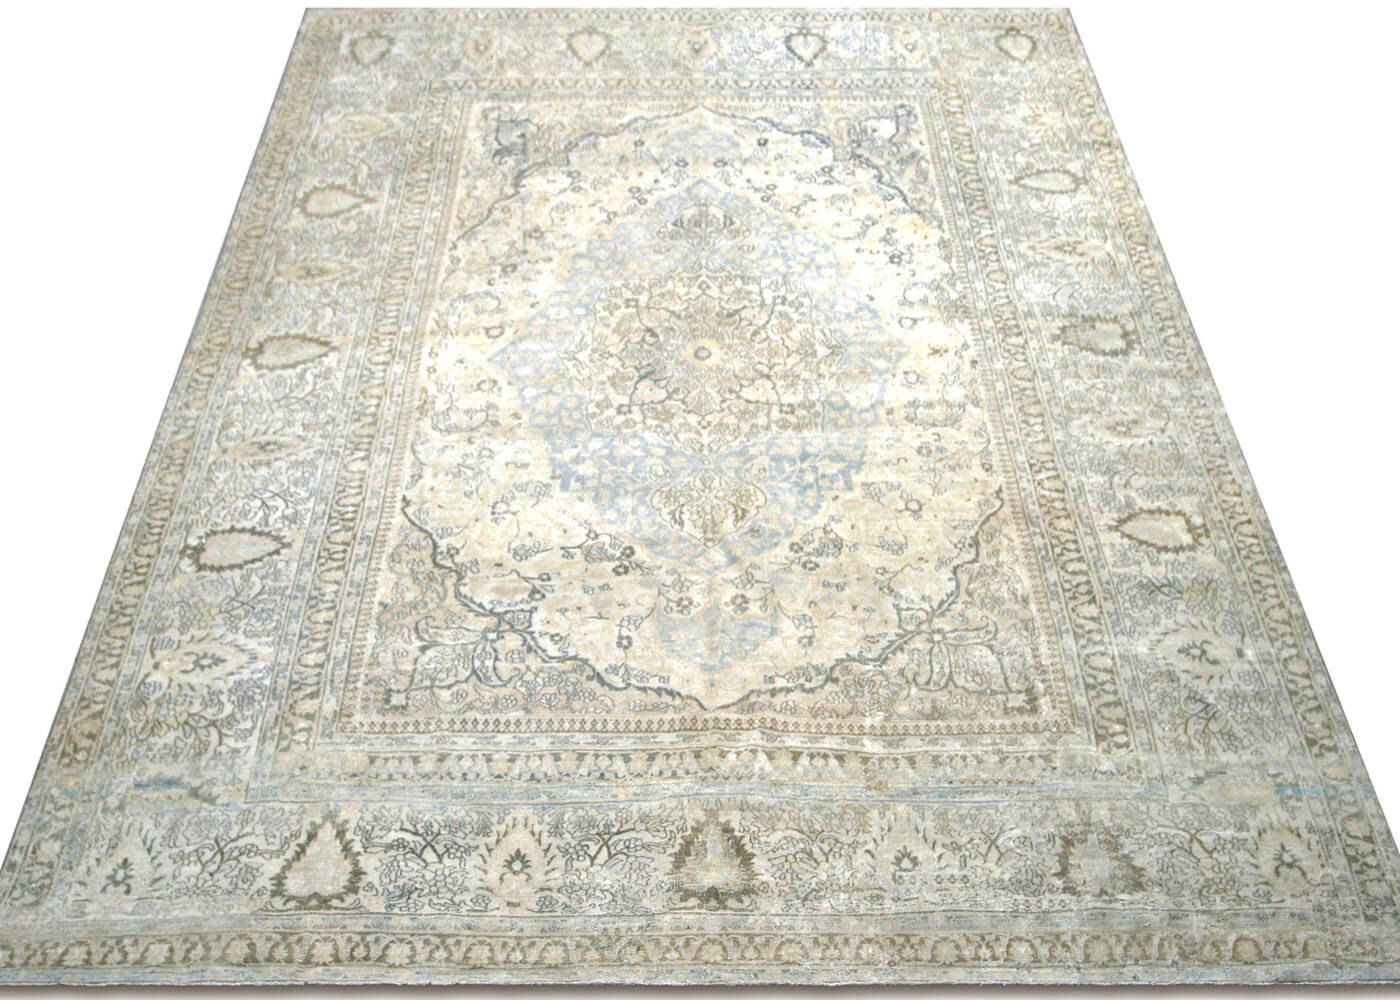 Antique Persian Meshed Rug - 12' x 16'5"